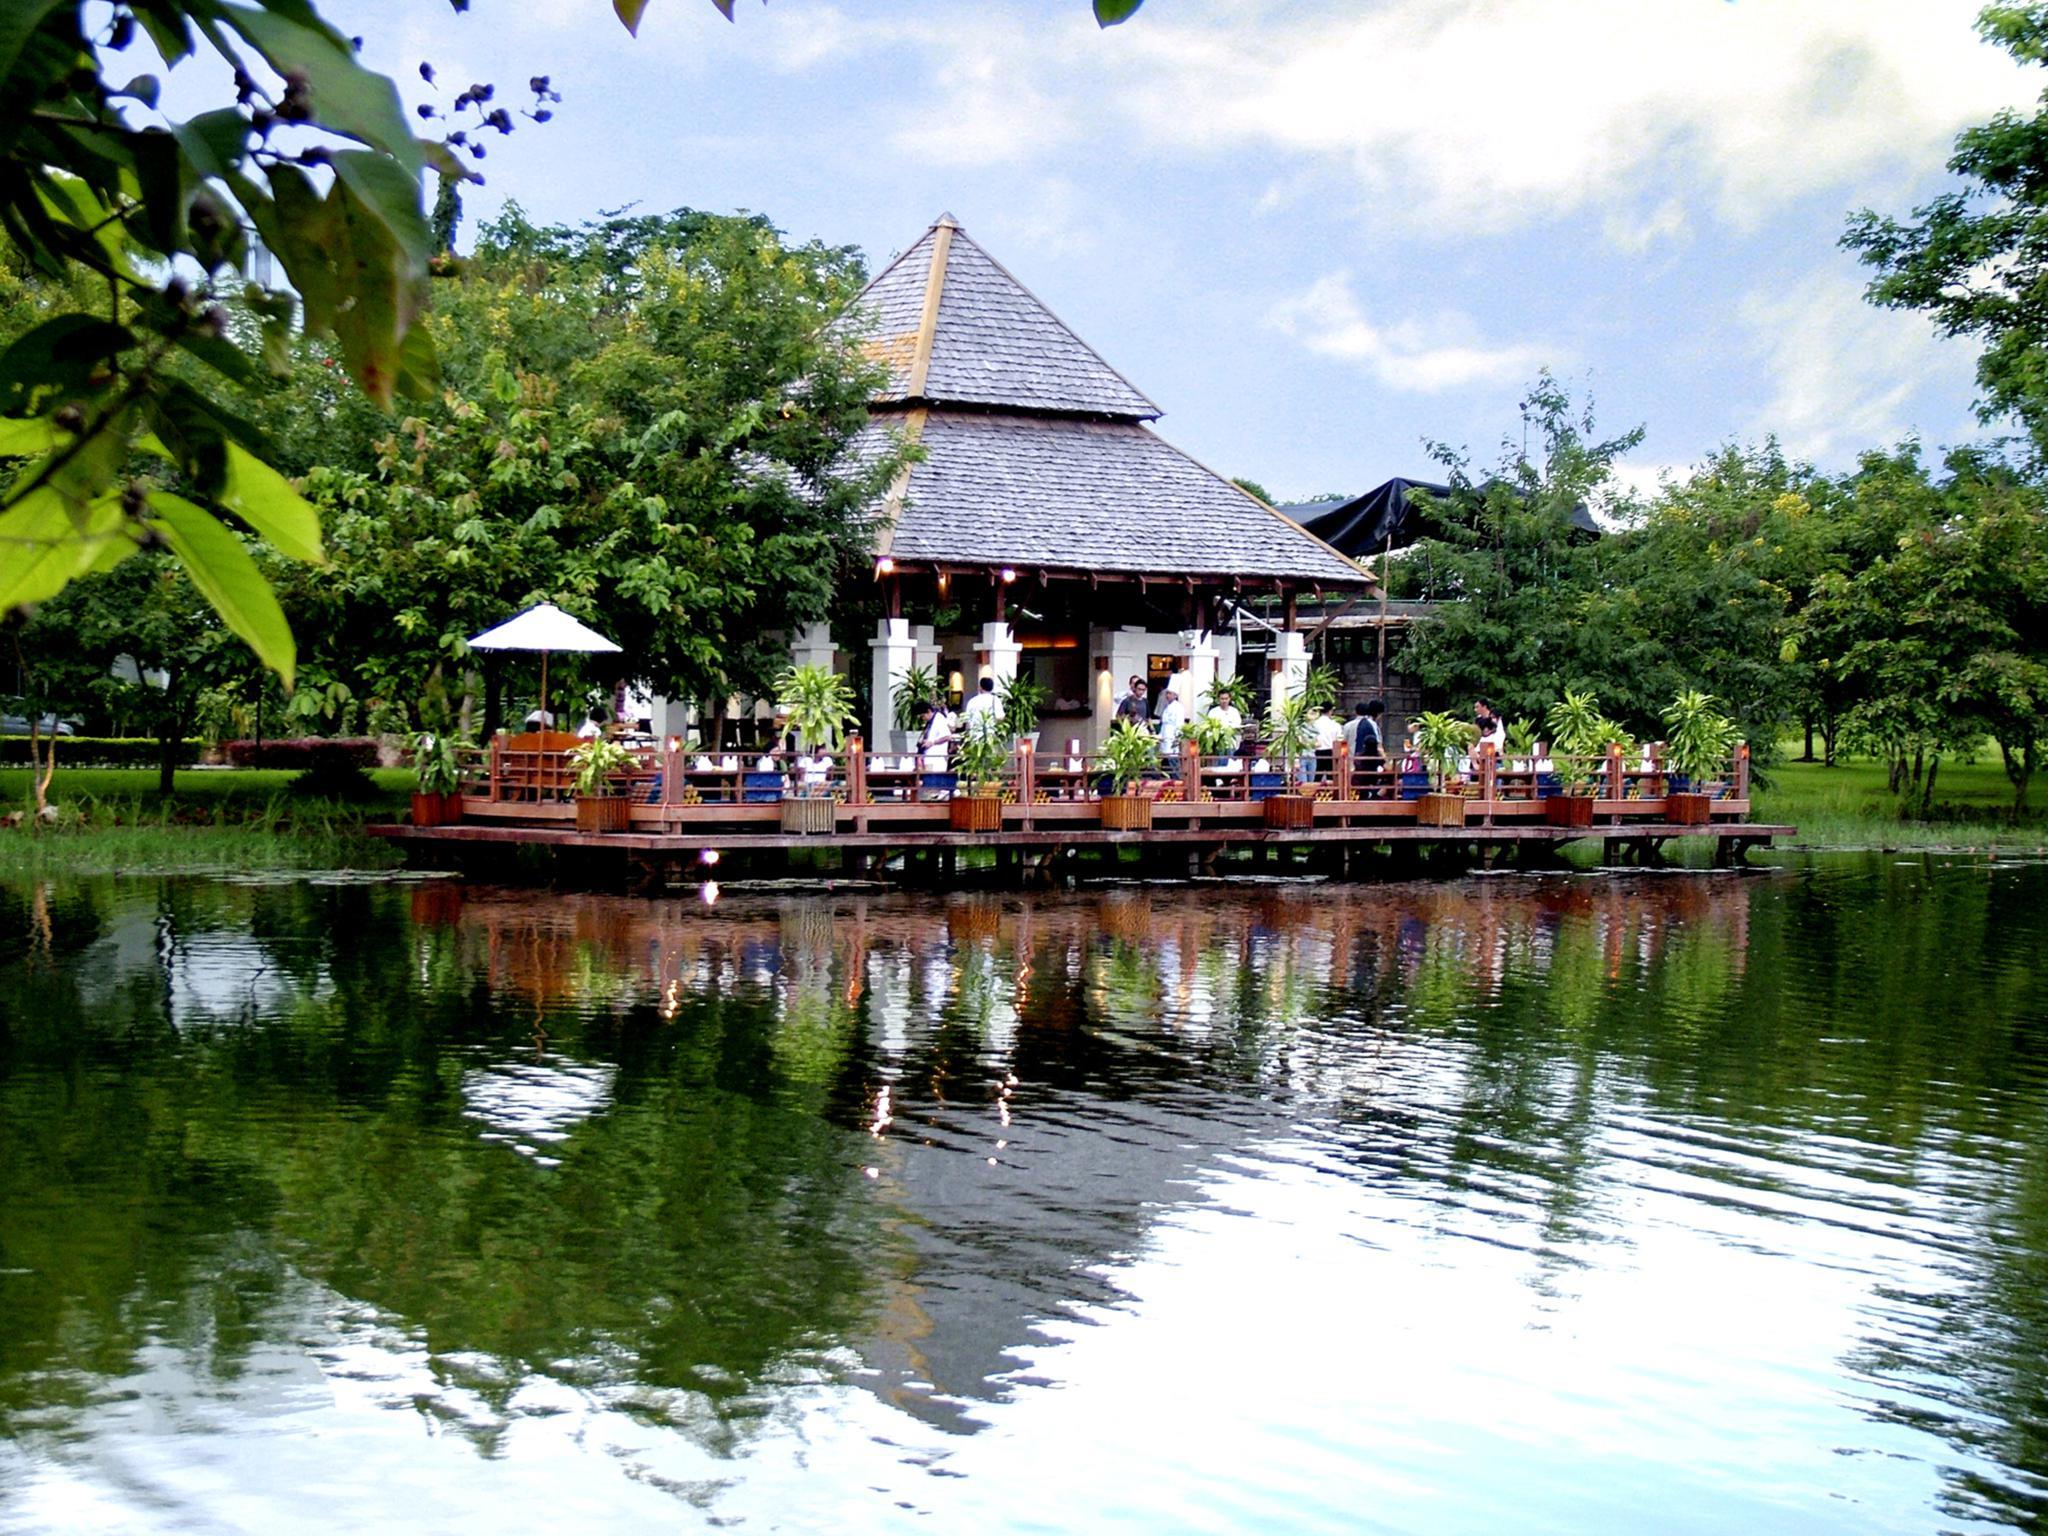 Centara Mae Sot Hill Resort Thailand FAQ 2016, What facilities are there in Centara Mae Sot Hill Resort Thailand 2016, What Languages Spoken are Supported in Centara Mae Sot Hill Resort Thailand 2016, Which payment cards are accepted in Centara Mae Sot Hill Resort Thailand , Thailand Centara Mae Sot Hill Resort room facilities and services Q&A 2016, Thailand Centara Mae Sot Hill Resort online booking services 2016, Thailand Centara Mae Sot Hill Resort address 2016, Thailand Centara Mae Sot Hill Resort telephone number 2016,Thailand Centara Mae Sot Hill Resort map 2016, Thailand Centara Mae Sot Hill Resort traffic guide 2016, how to go Thailand Centara Mae Sot Hill Resort, Thailand Centara Mae Sot Hill Resort booking online 2016, Thailand Centara Mae Sot Hill Resort room types 2016.